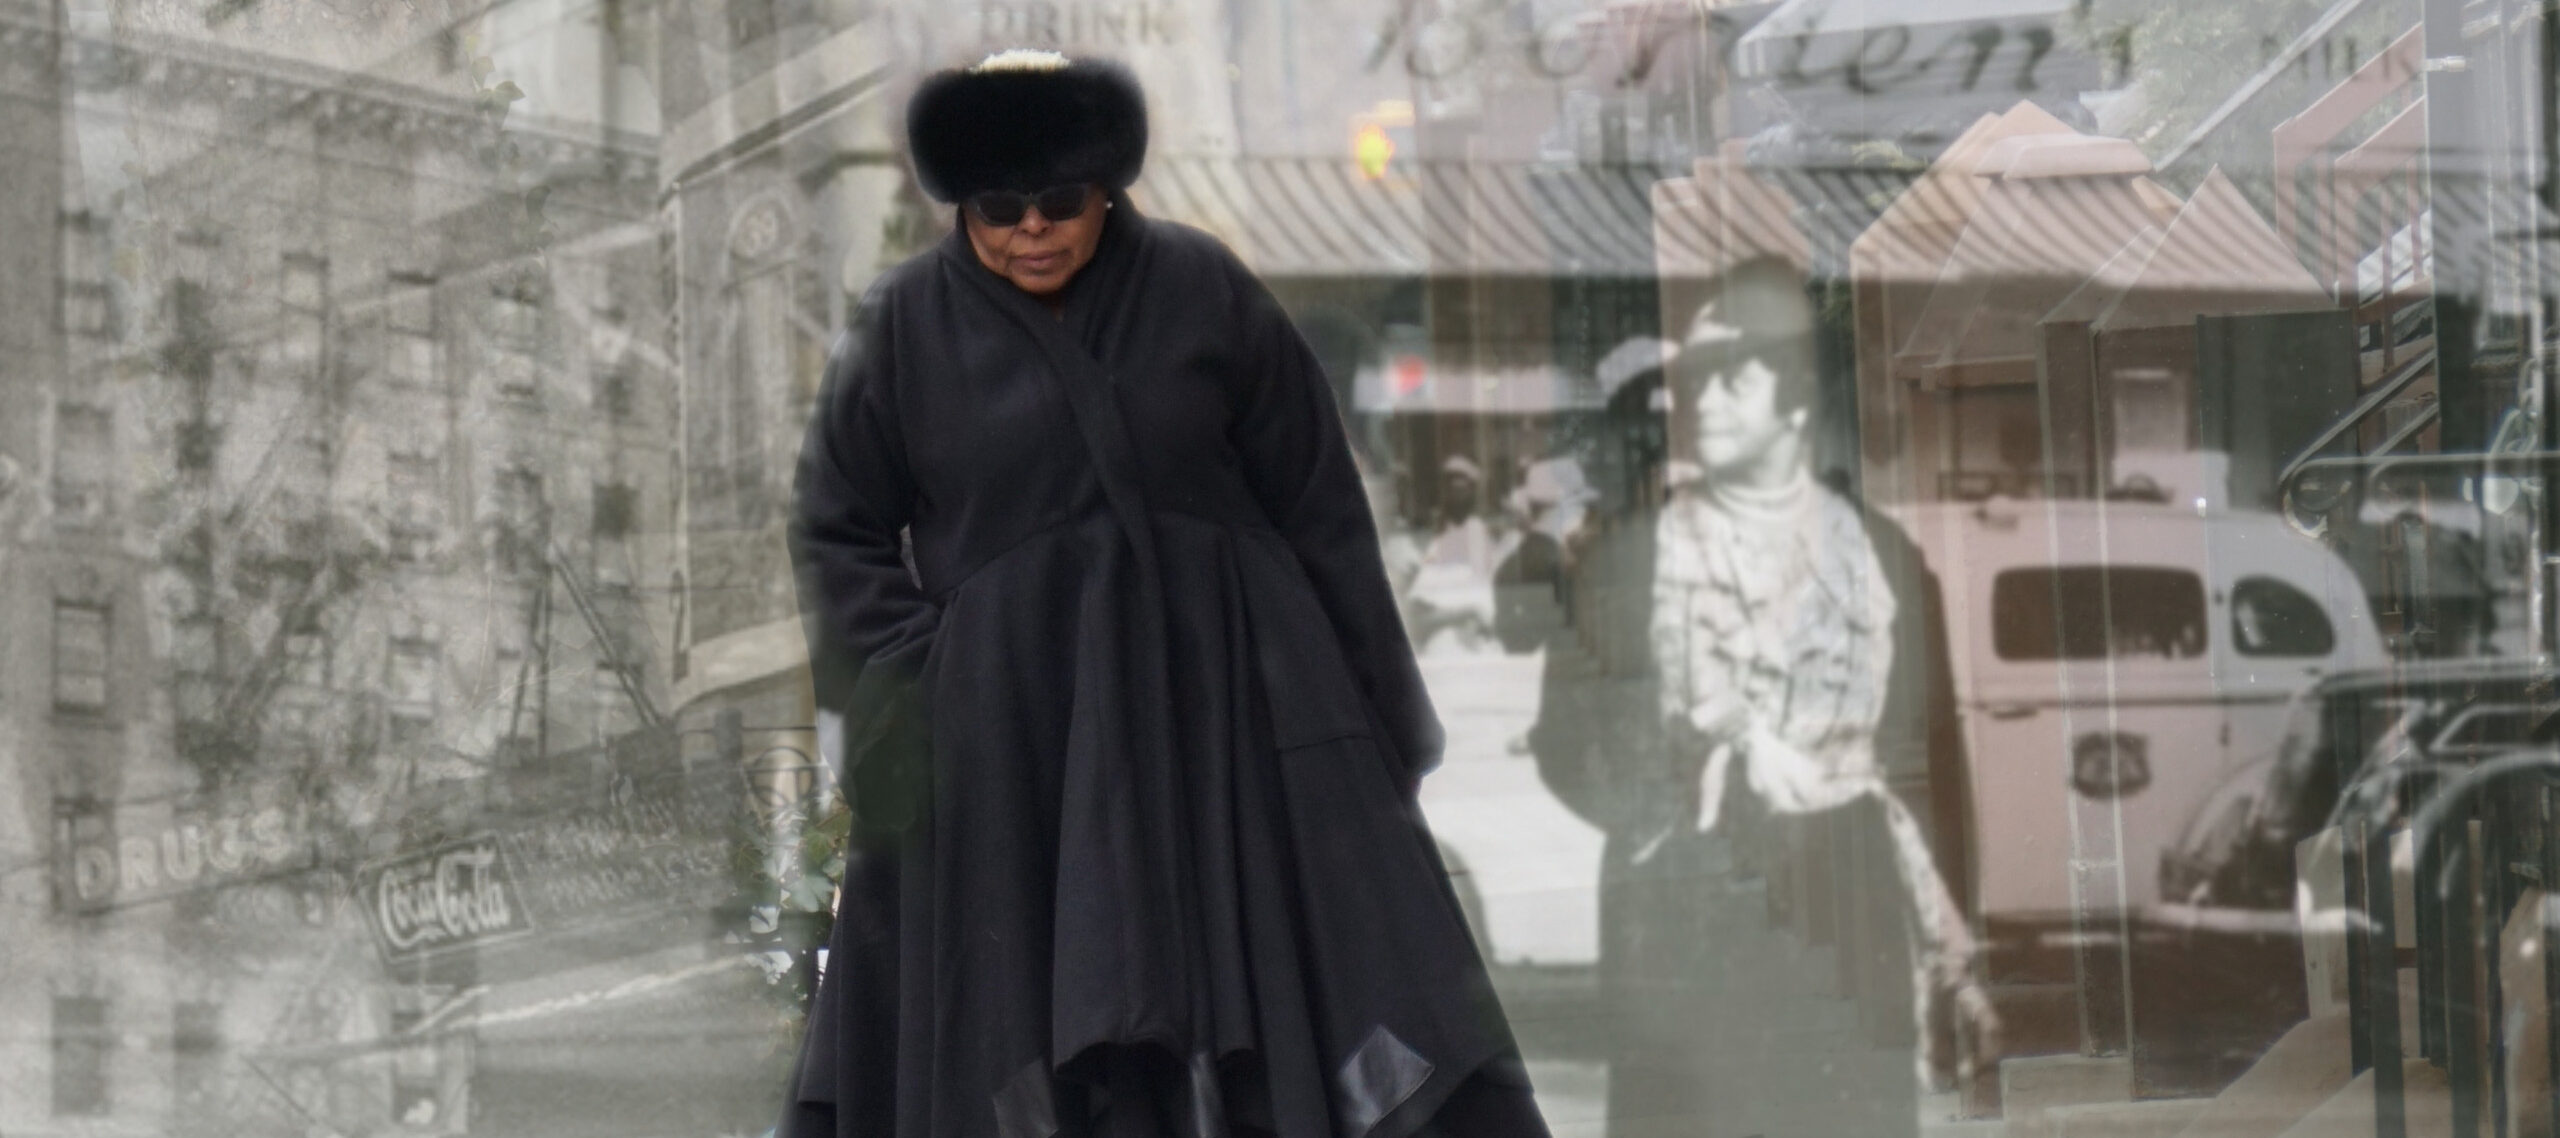 A medium-dark skinned adult woman wearing all black—a fur hat, sunglasses, boots, and a long, voluminous coat—walks on a sidewalk toward the viewer. Black and white images of people and buildings in Harlem from the early 20th century are layered over the woman.